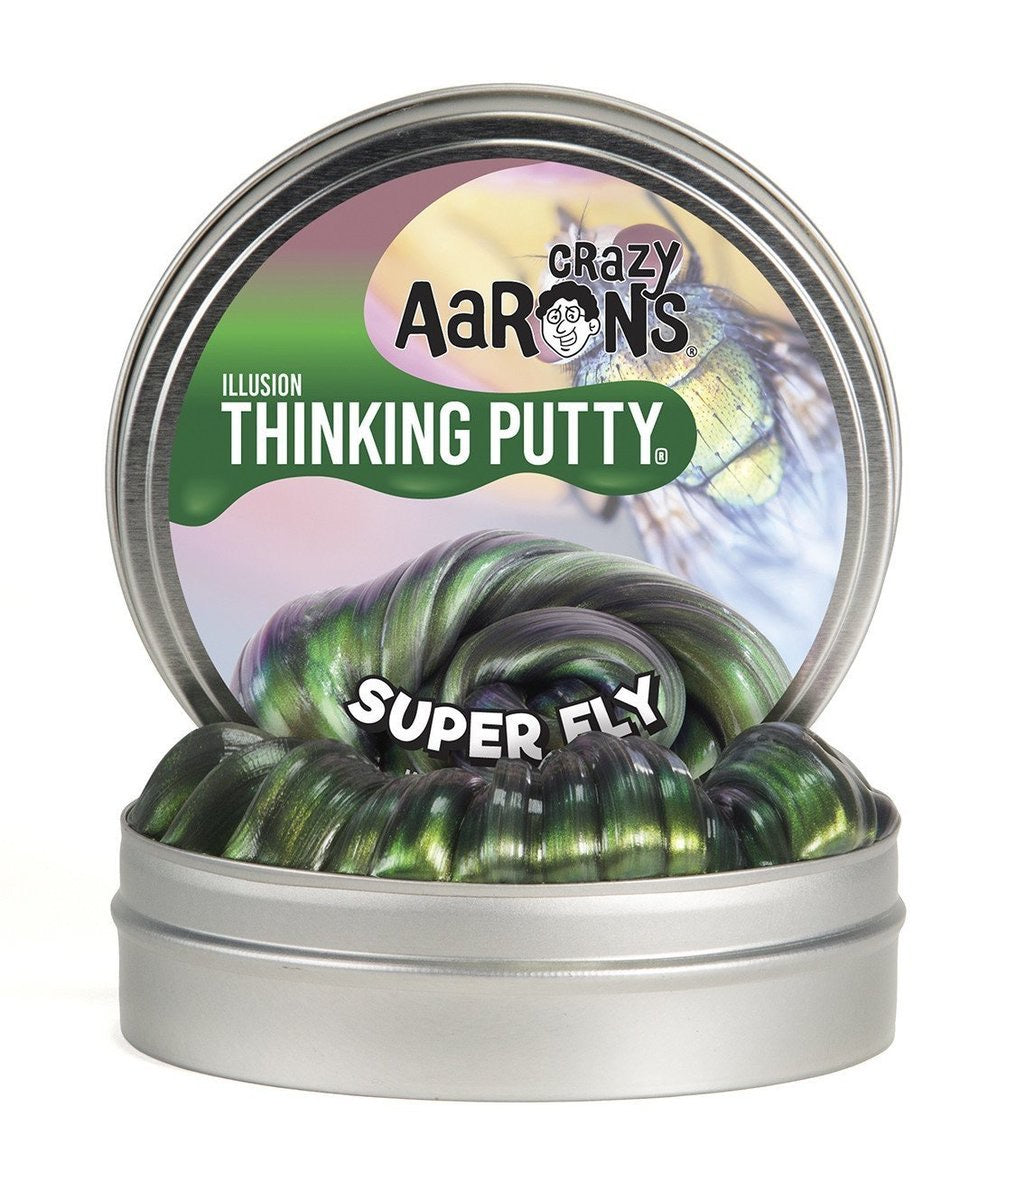 Super Fly Illusions 4'' Tin Thinking Putty by Crazy Aaron’s